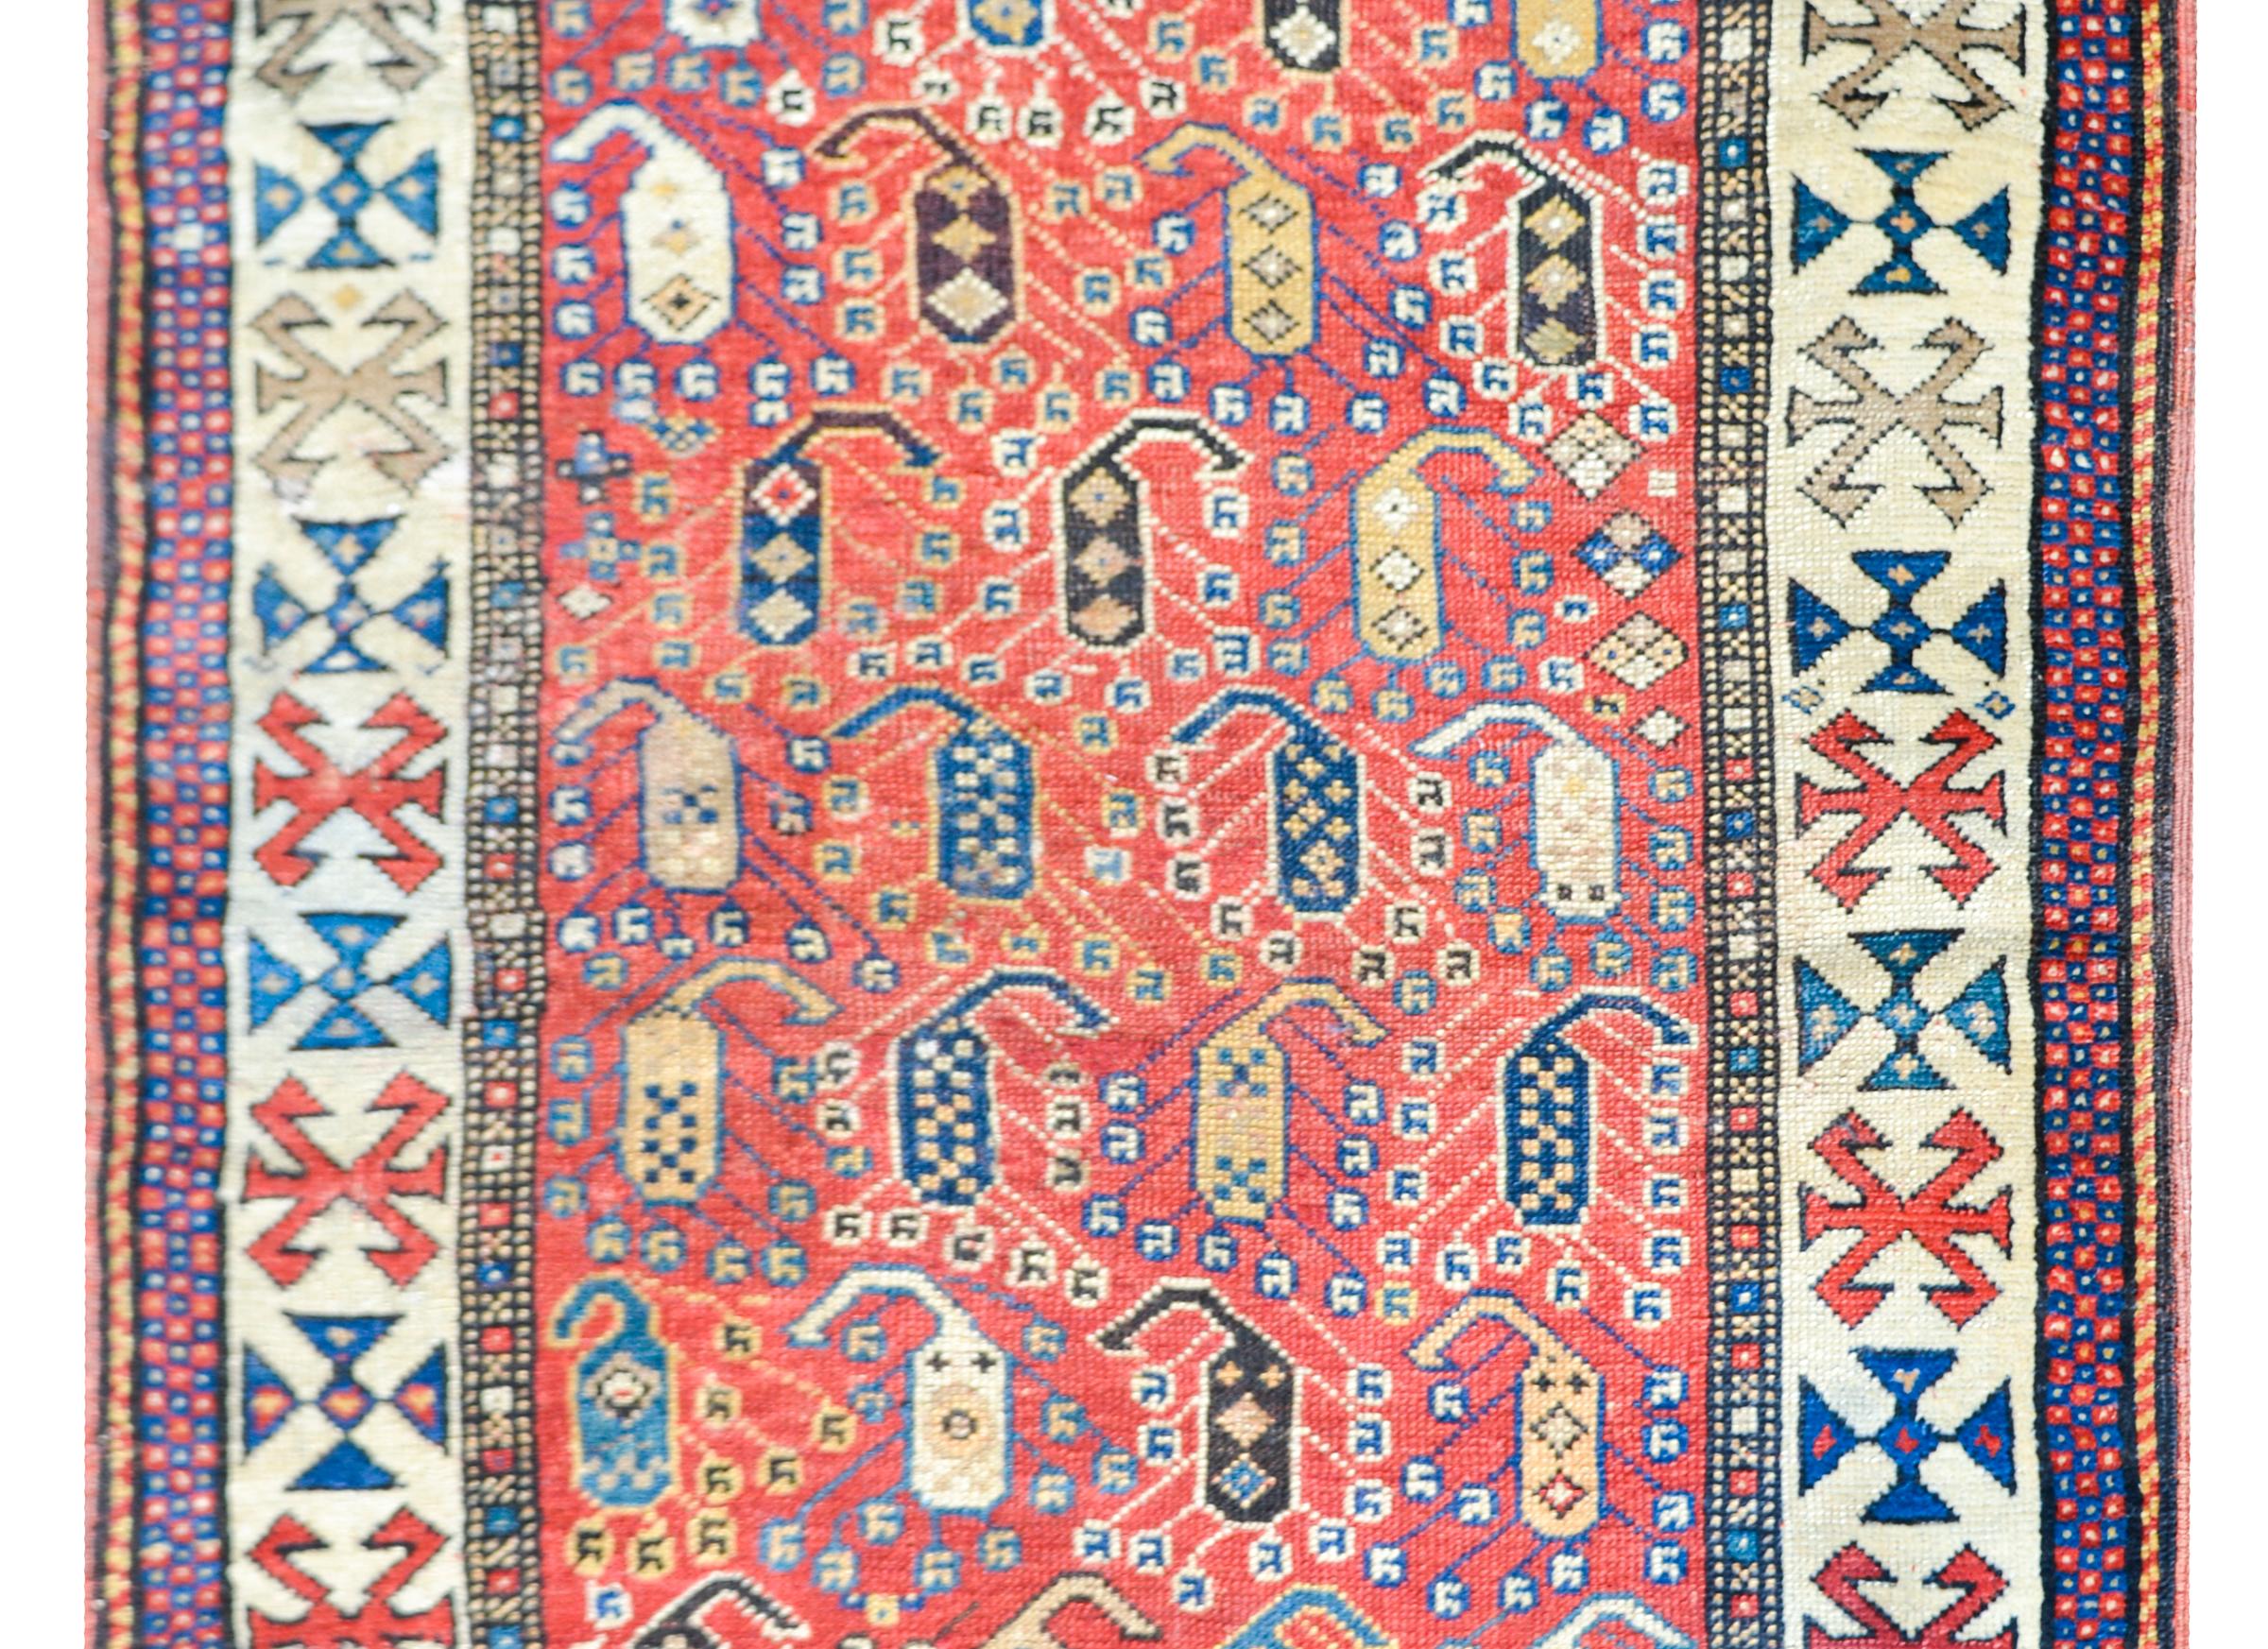 An incredible early 20th century Azerbaijani Ganjeh rug with an all-over multi-colored paisley pattern across the field set against an abrash crimson background, and surrounded by a beautiful stylized floral patterned border with a petite geometric